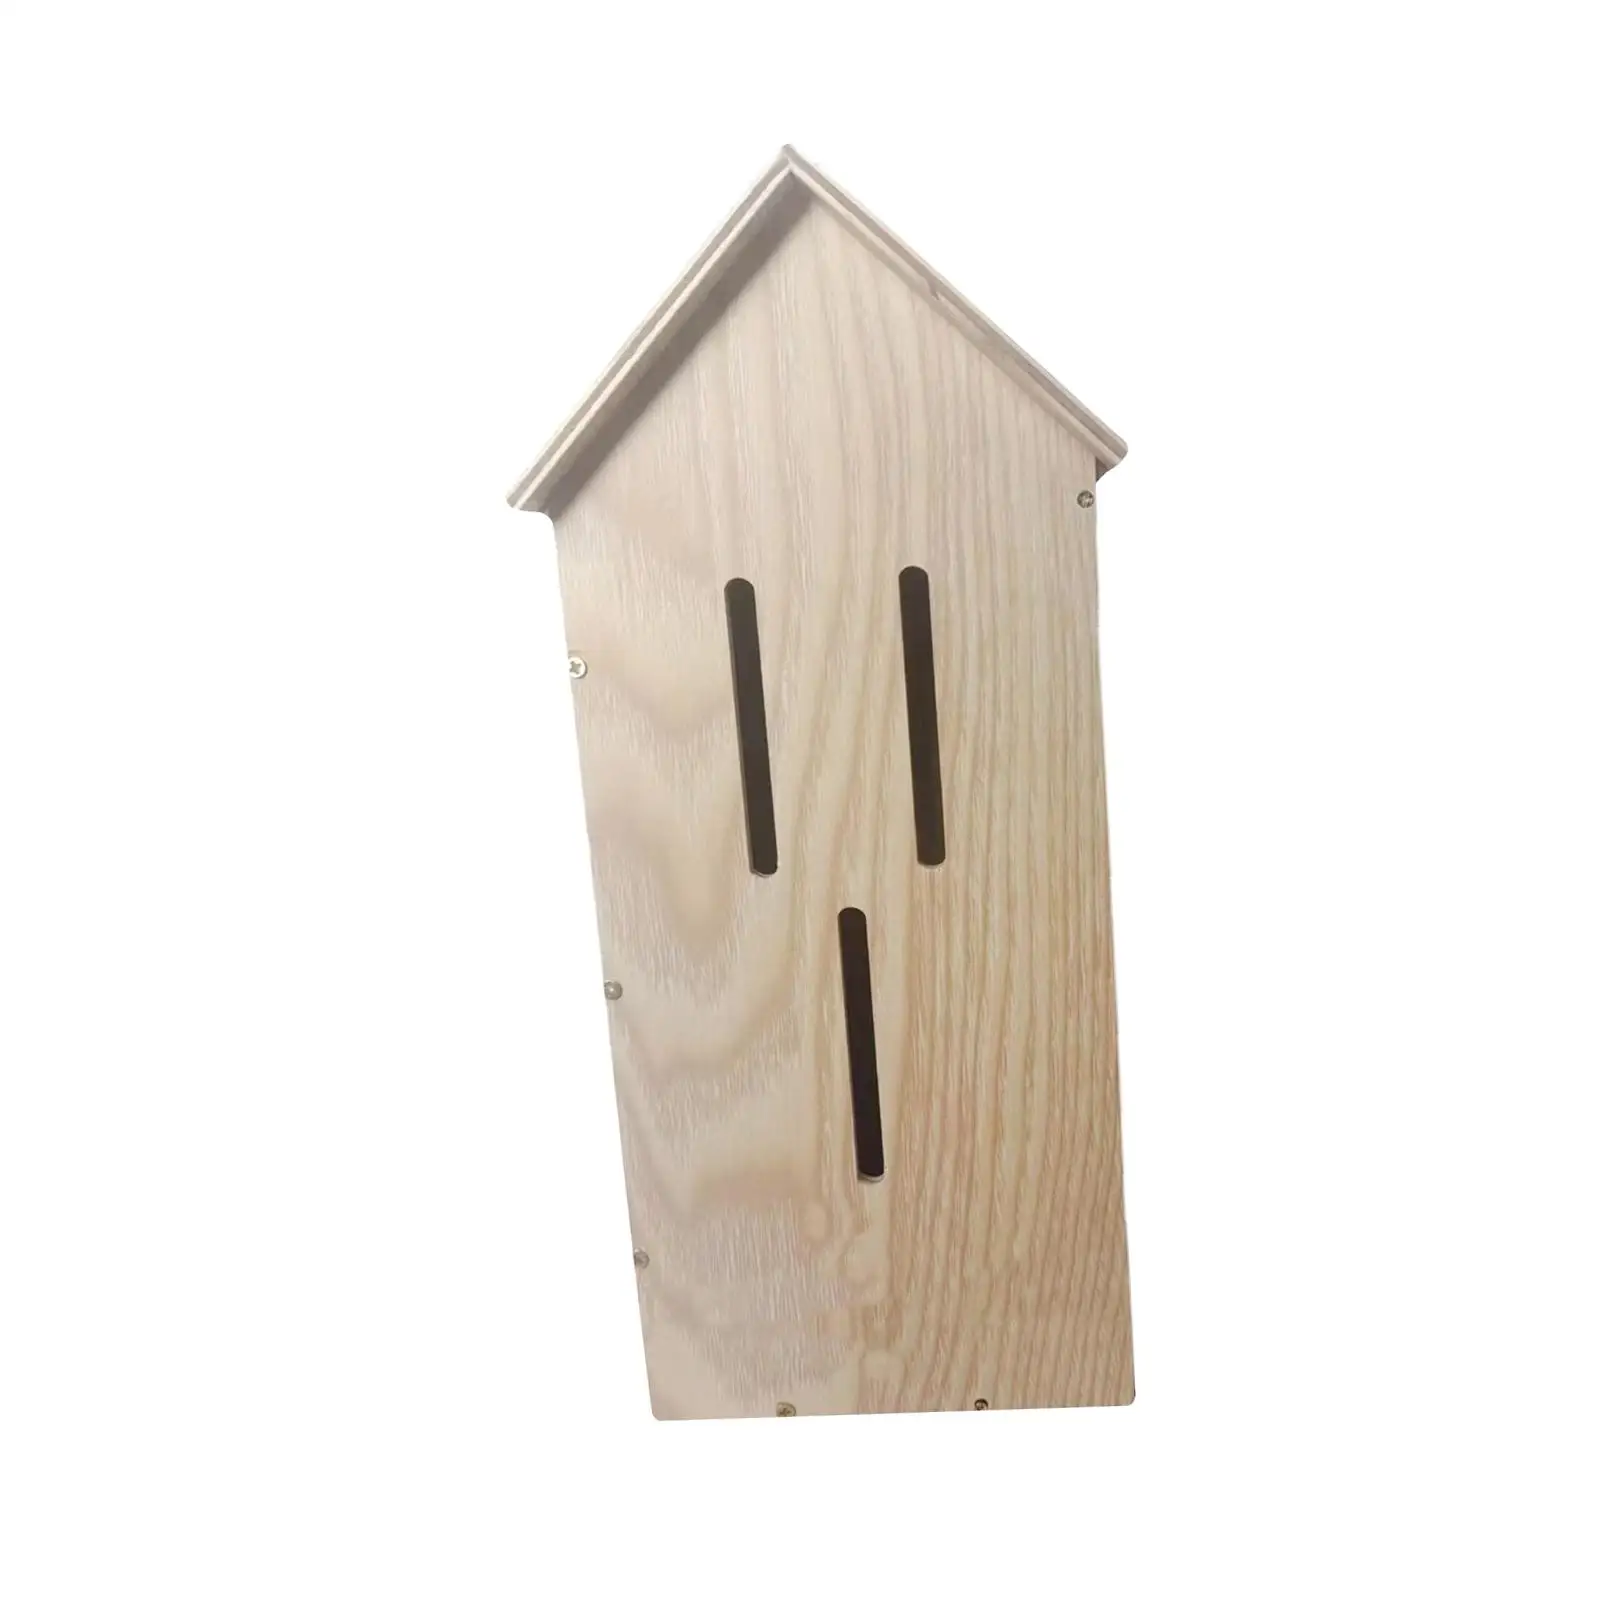 Wooden Butterfly House Tree Guards Trunk Protector Butterfly Habitat Supplies House for Garden Hotel Outdoor Room